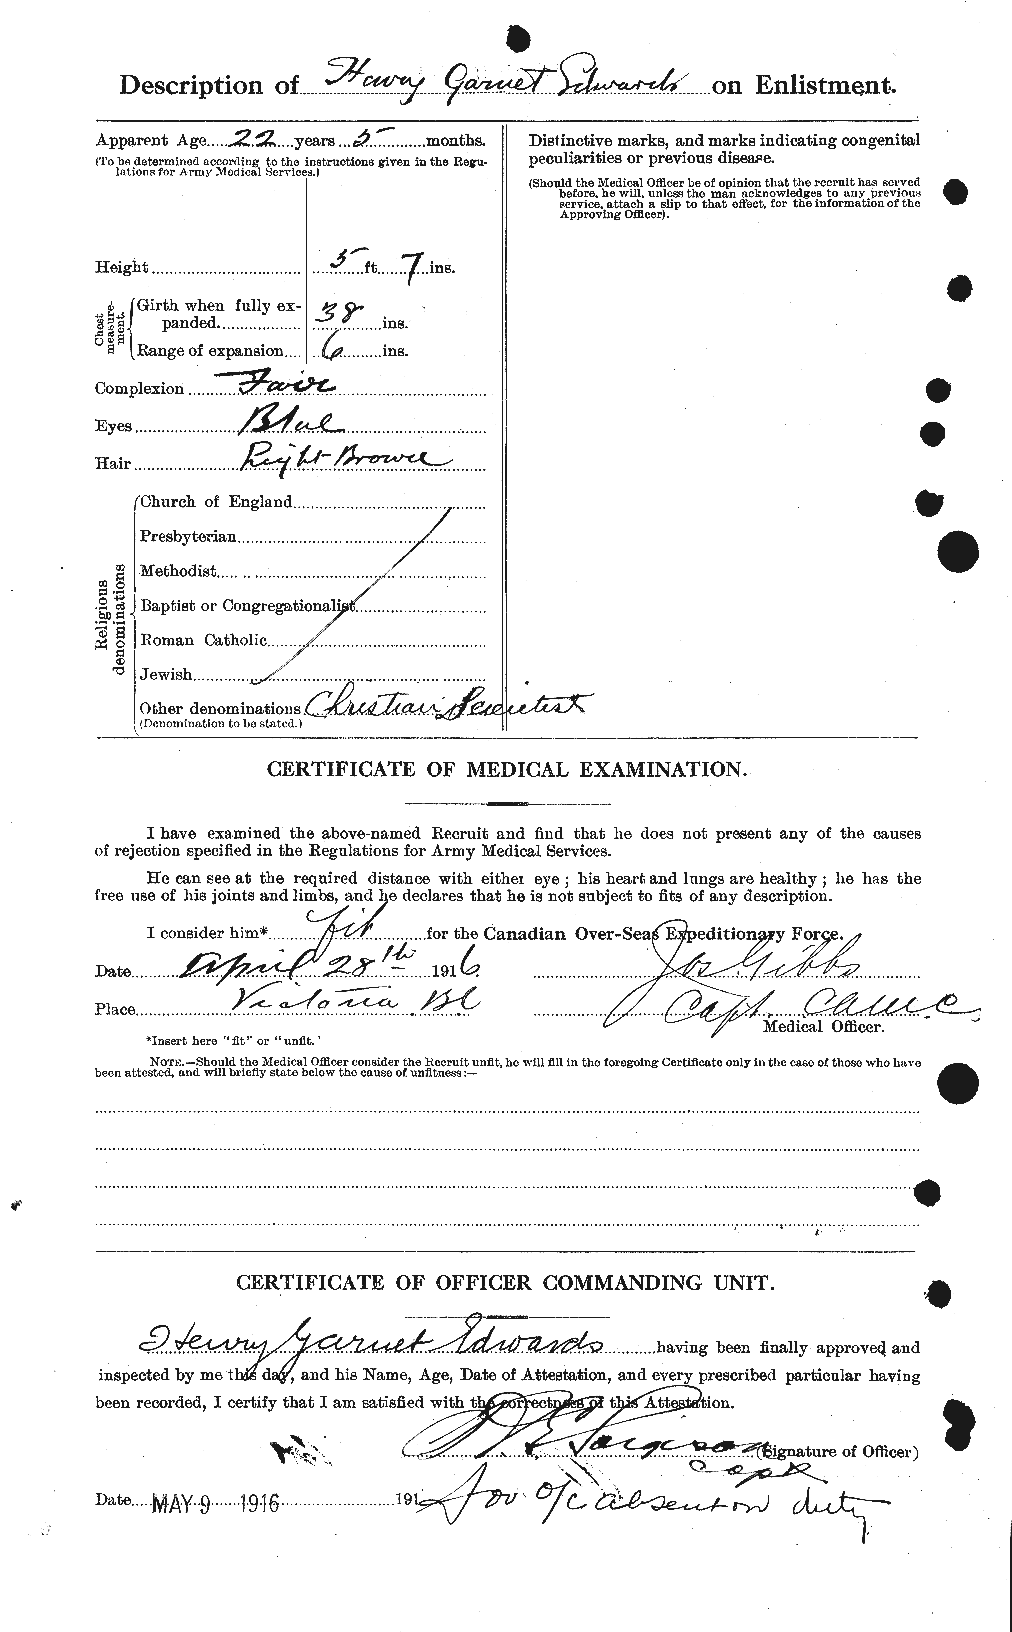 Personnel Records of the First World War - CEF 309760b